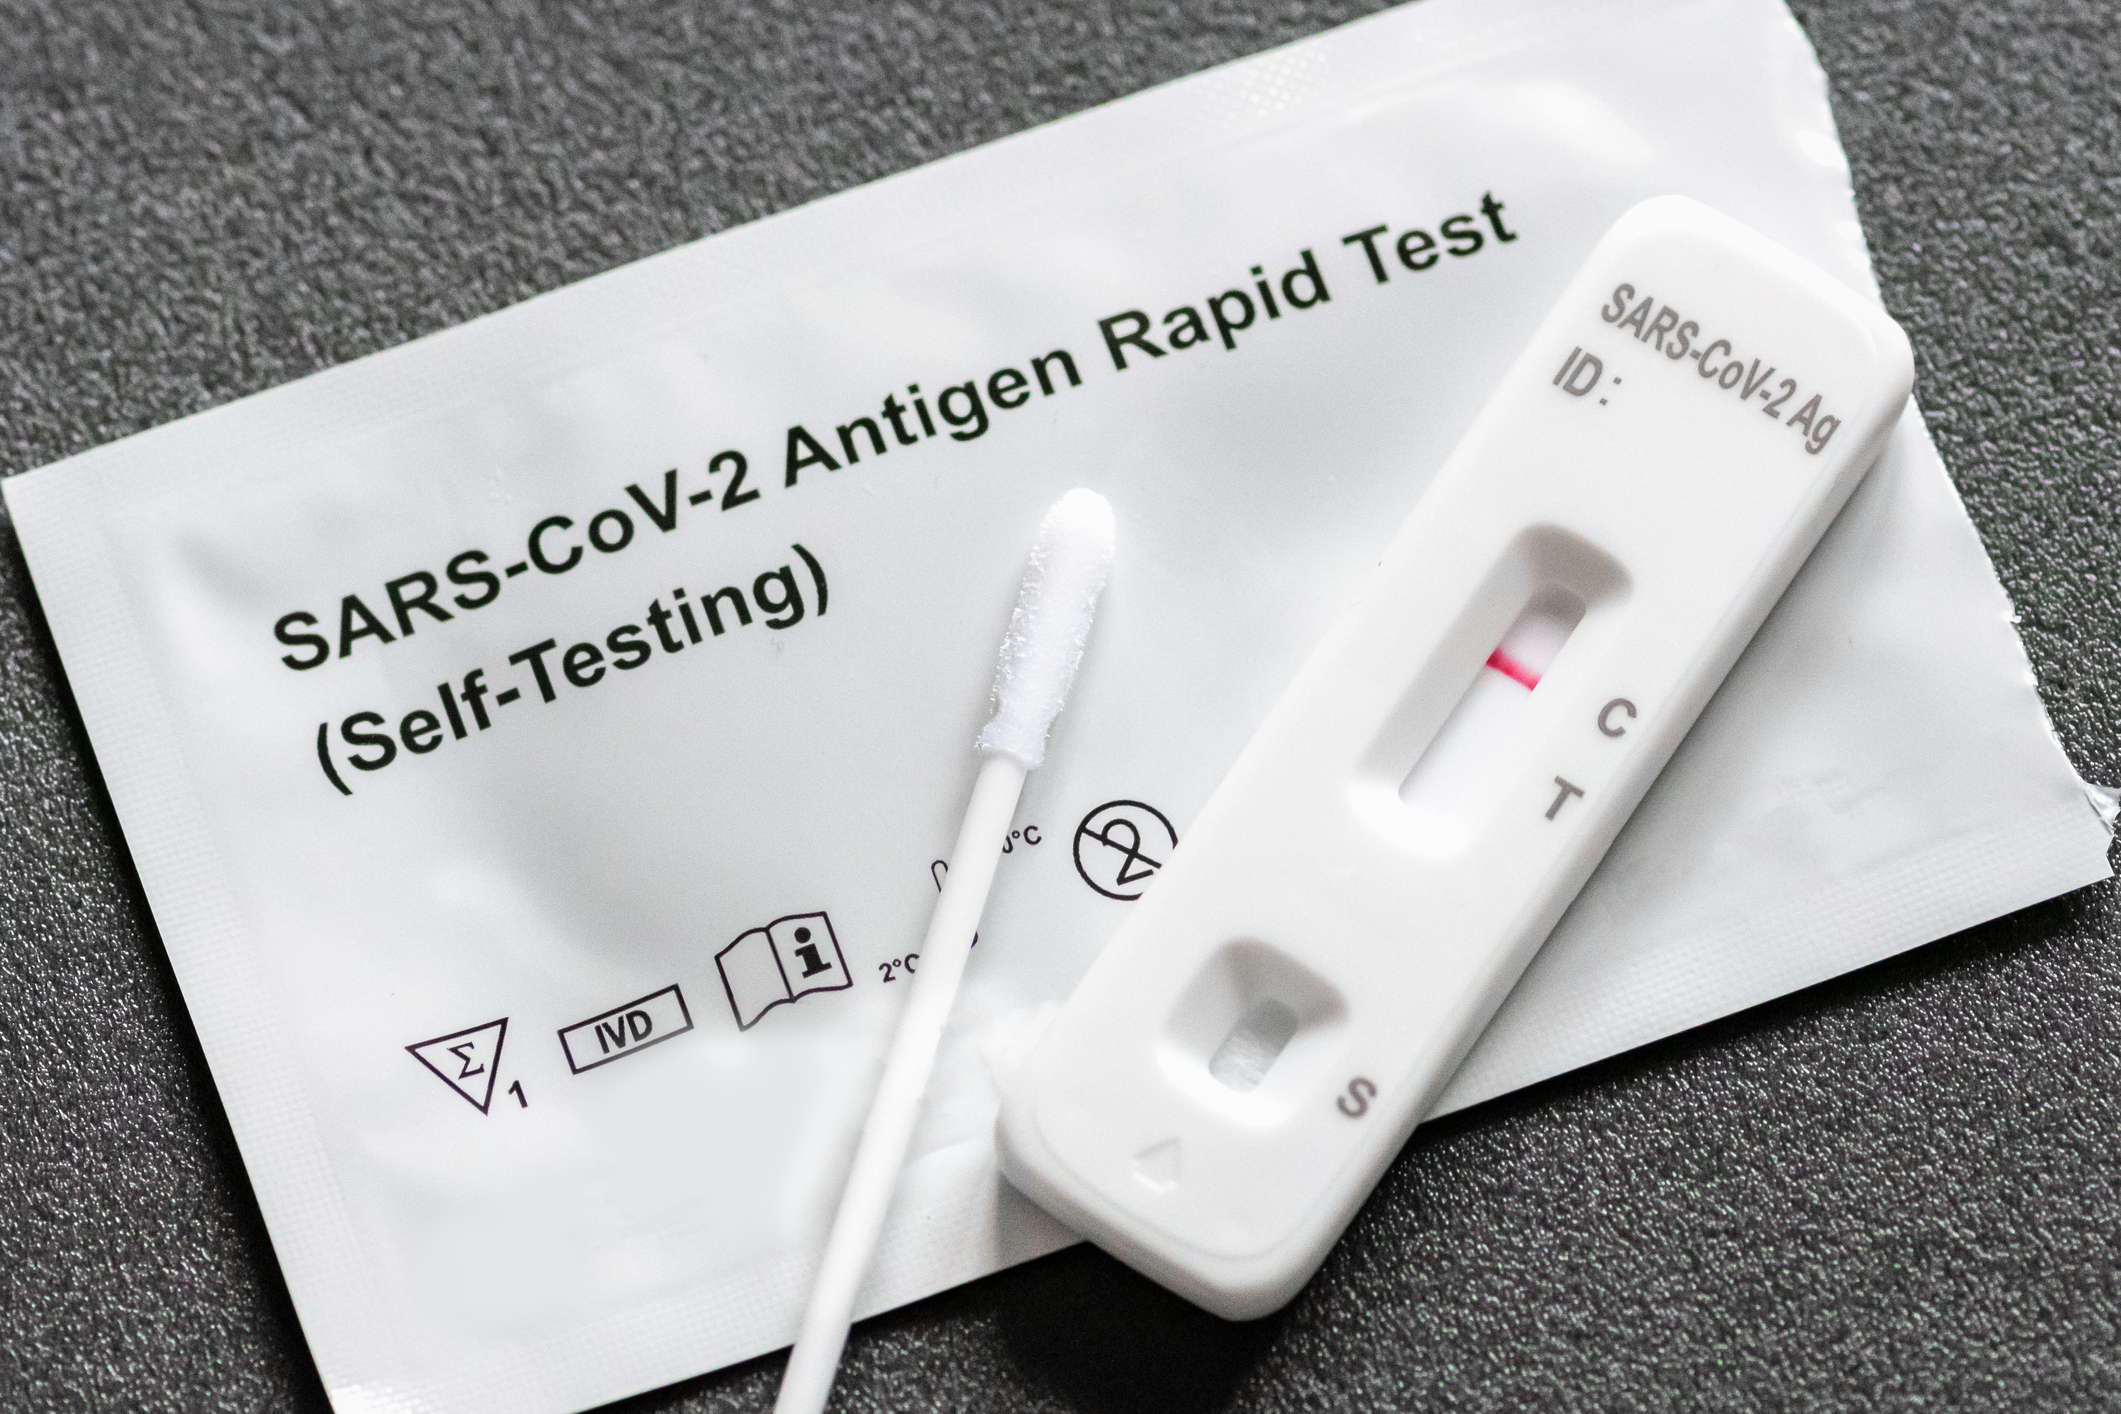 A negative at-home COVID self-test. The package reads "SARS-CoV-2 Antigen Rapid Test (Self-Testing)"